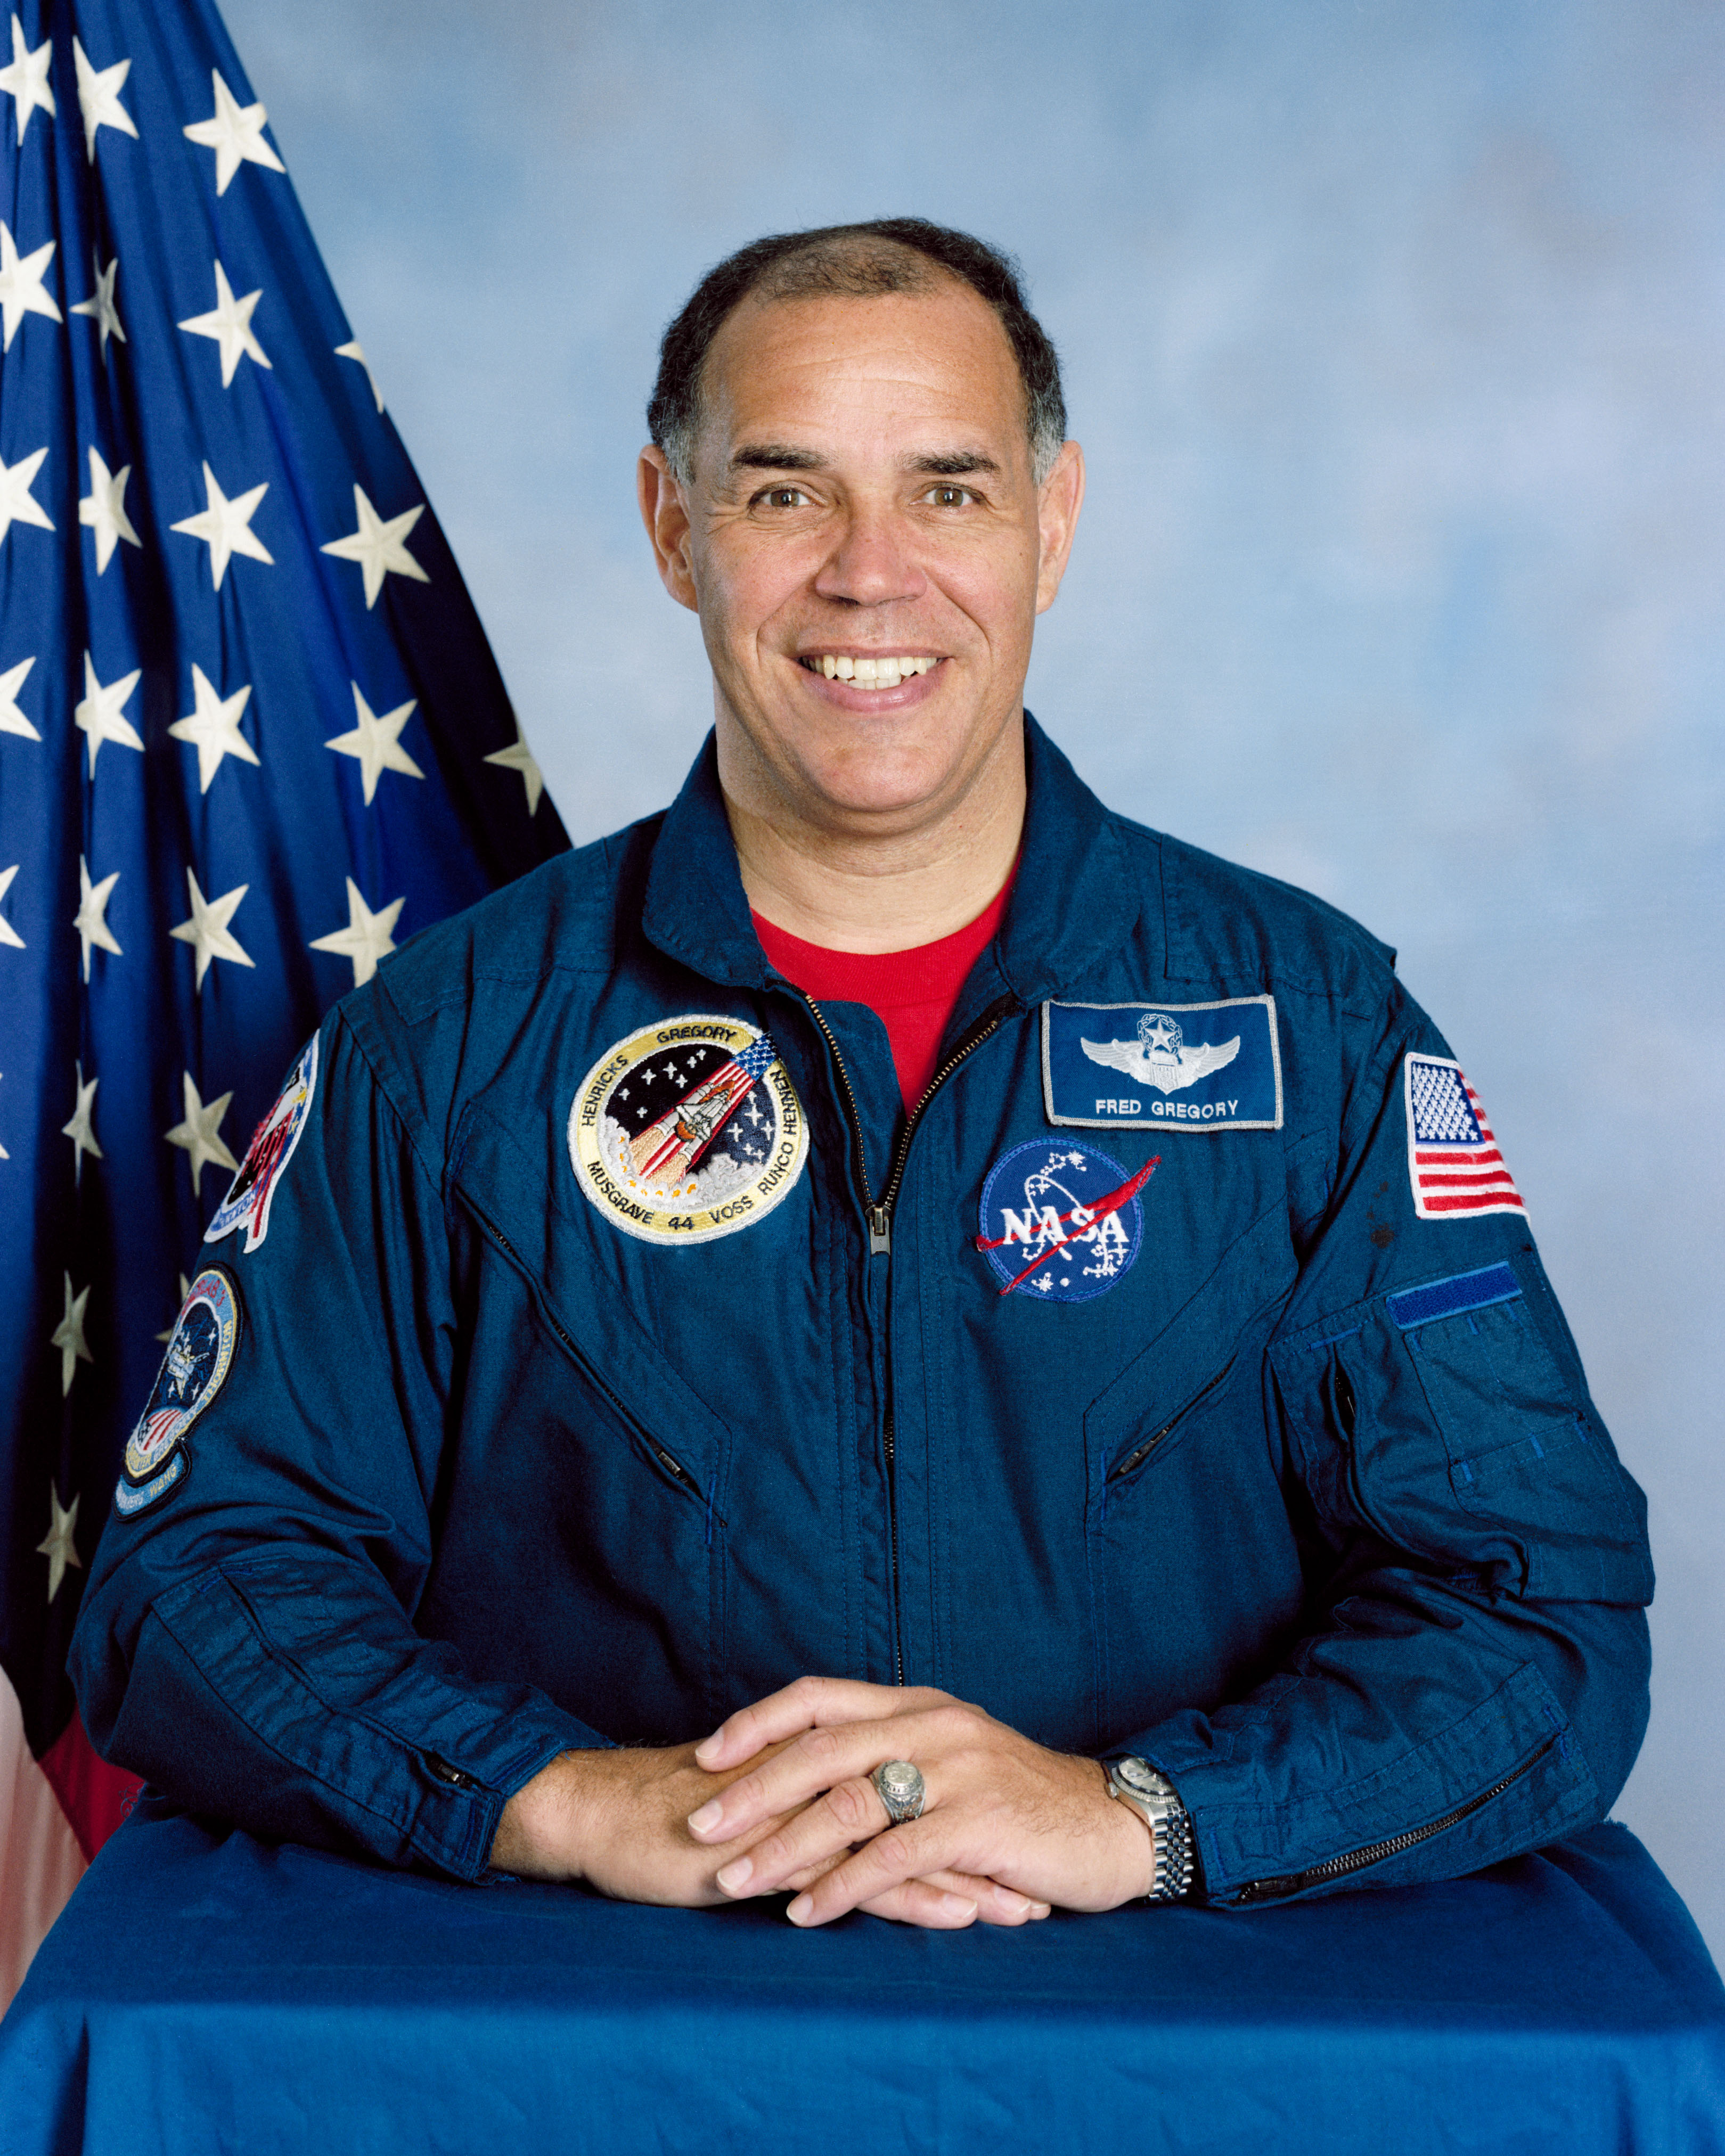 Official portrait of Frederick D. Gregory, a United States Air Force Colonel, wearing blue flight suit, with flag backdrop.